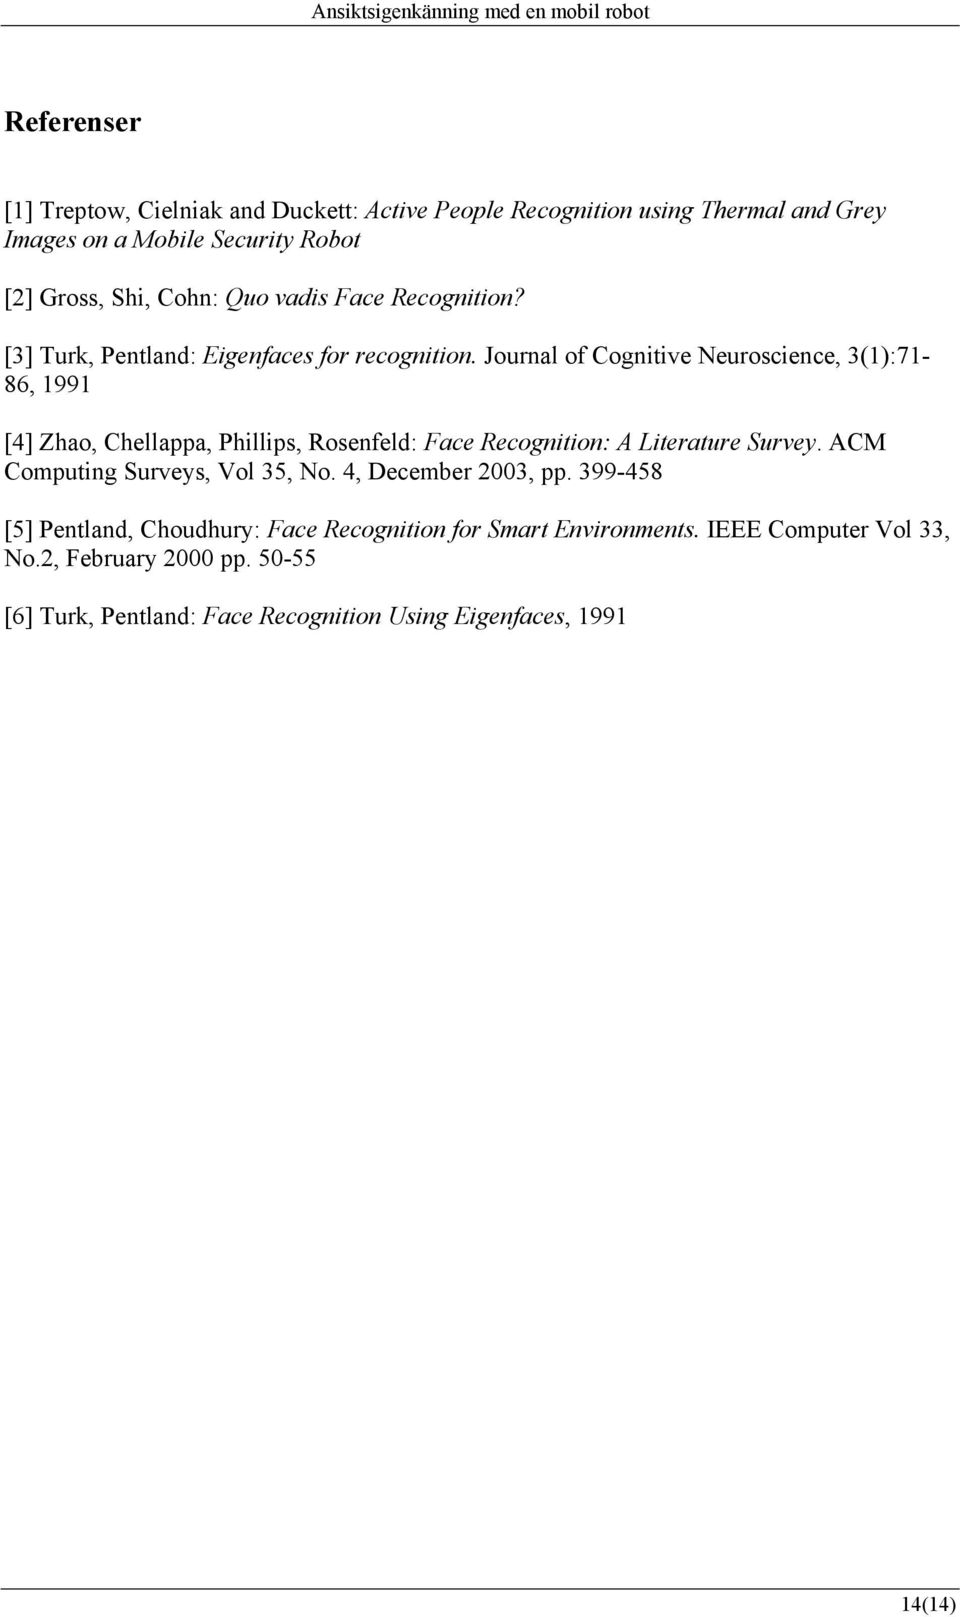 Journal of Cognitive Neuroscience, 3(1):71-86, 1991 [4] Zhao, Chellappa, Phillips, Rosenfeld: Face Recognition: A Literature Survey.